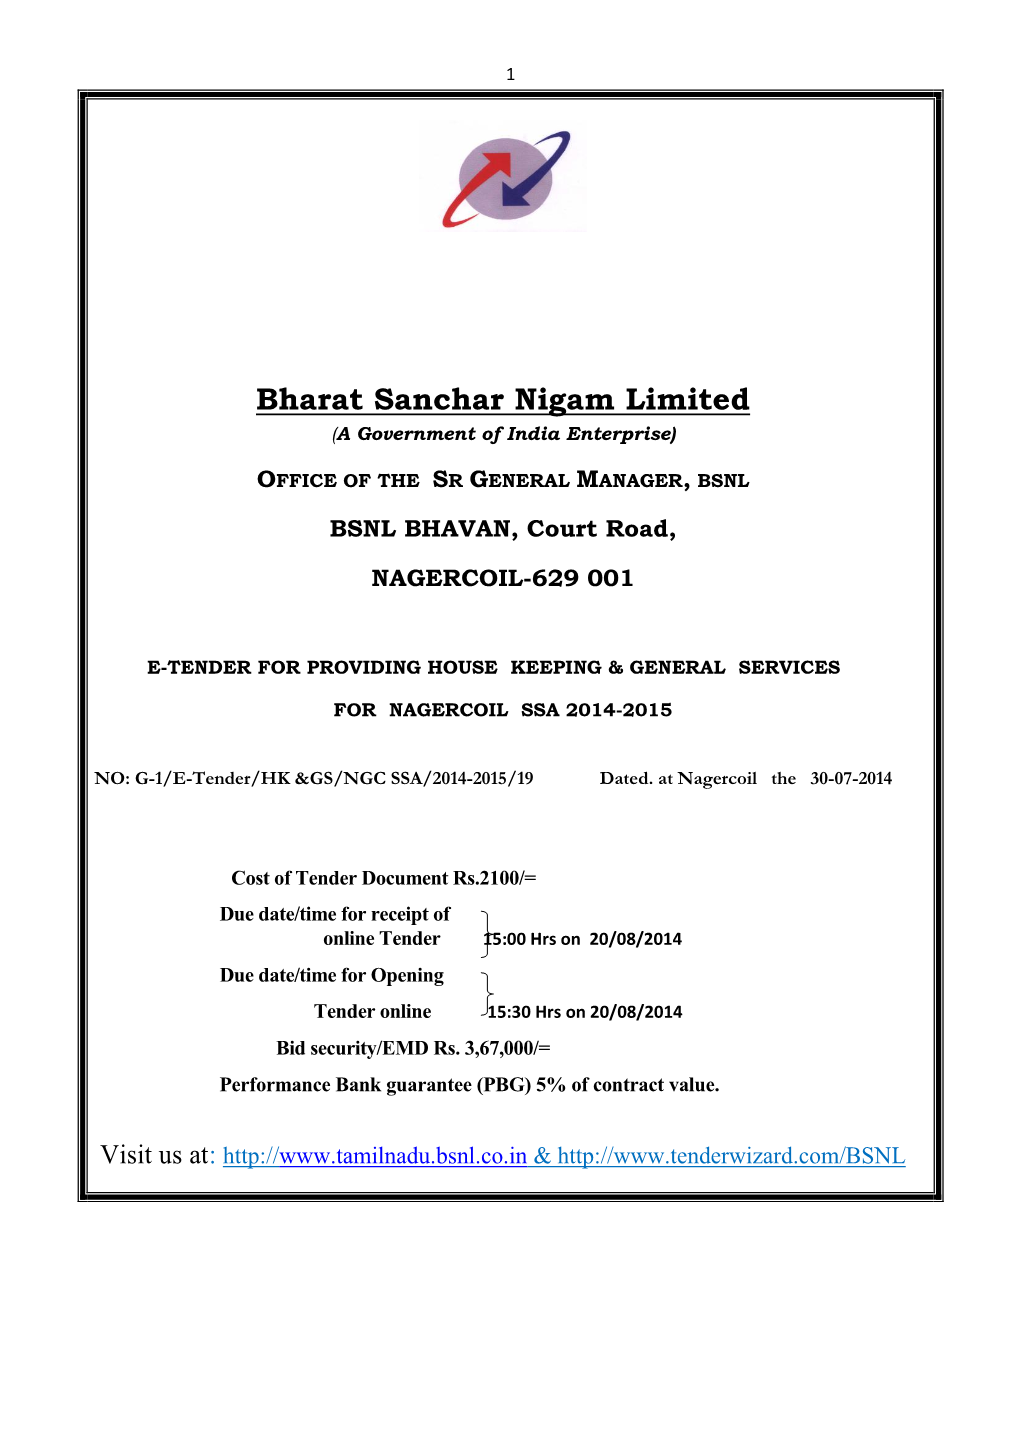 Bharat Sanchar Nigam Limited (A Government of India Enterprise)